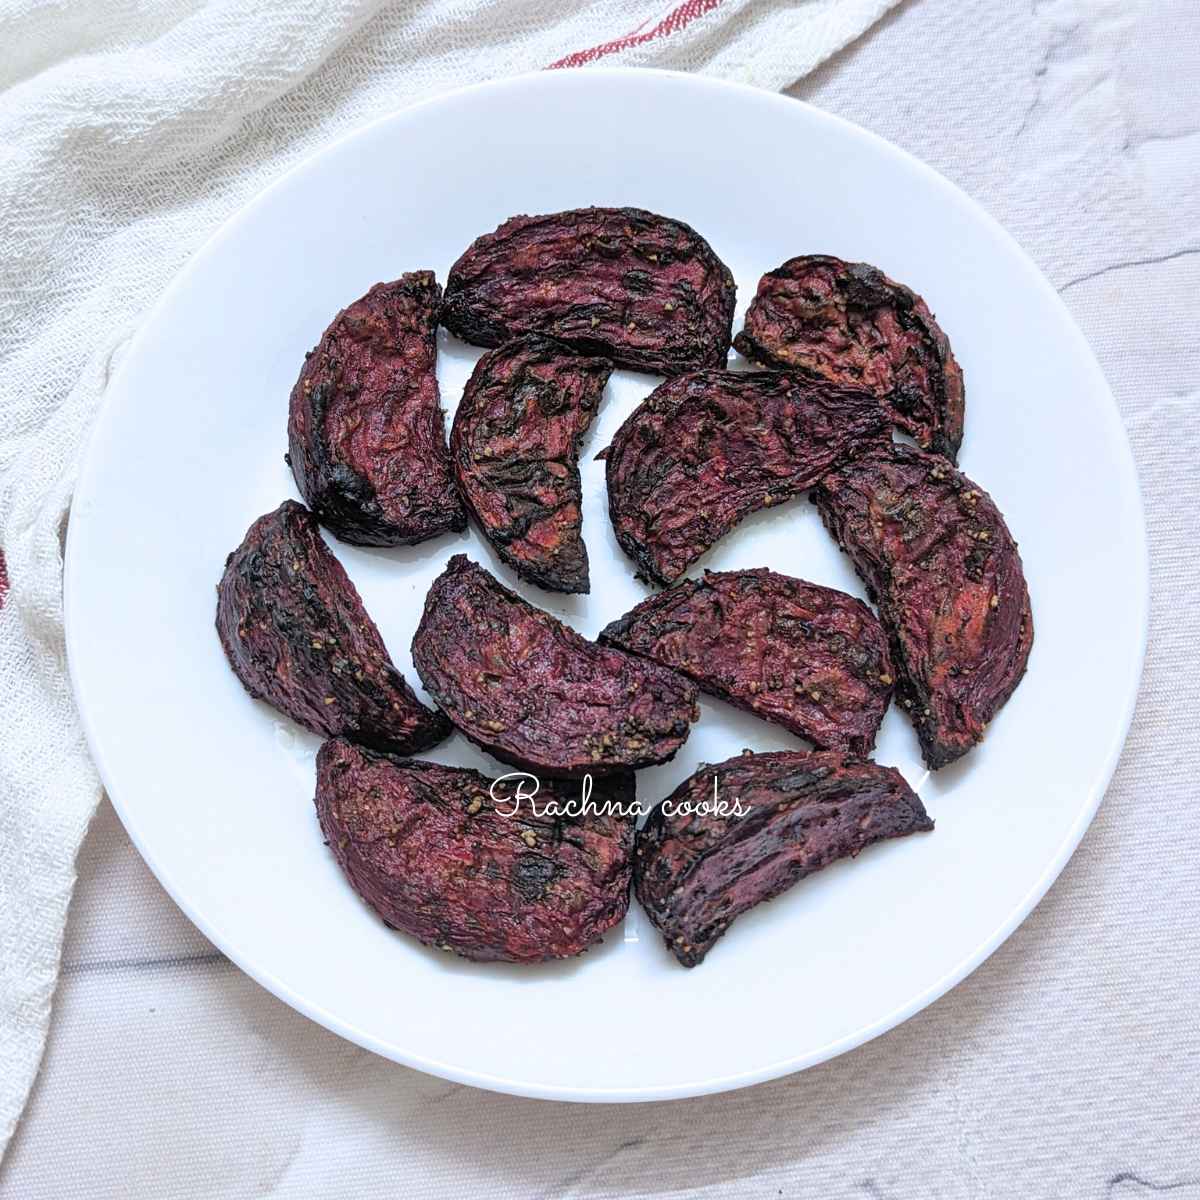 Roasted beets served on a white plate.